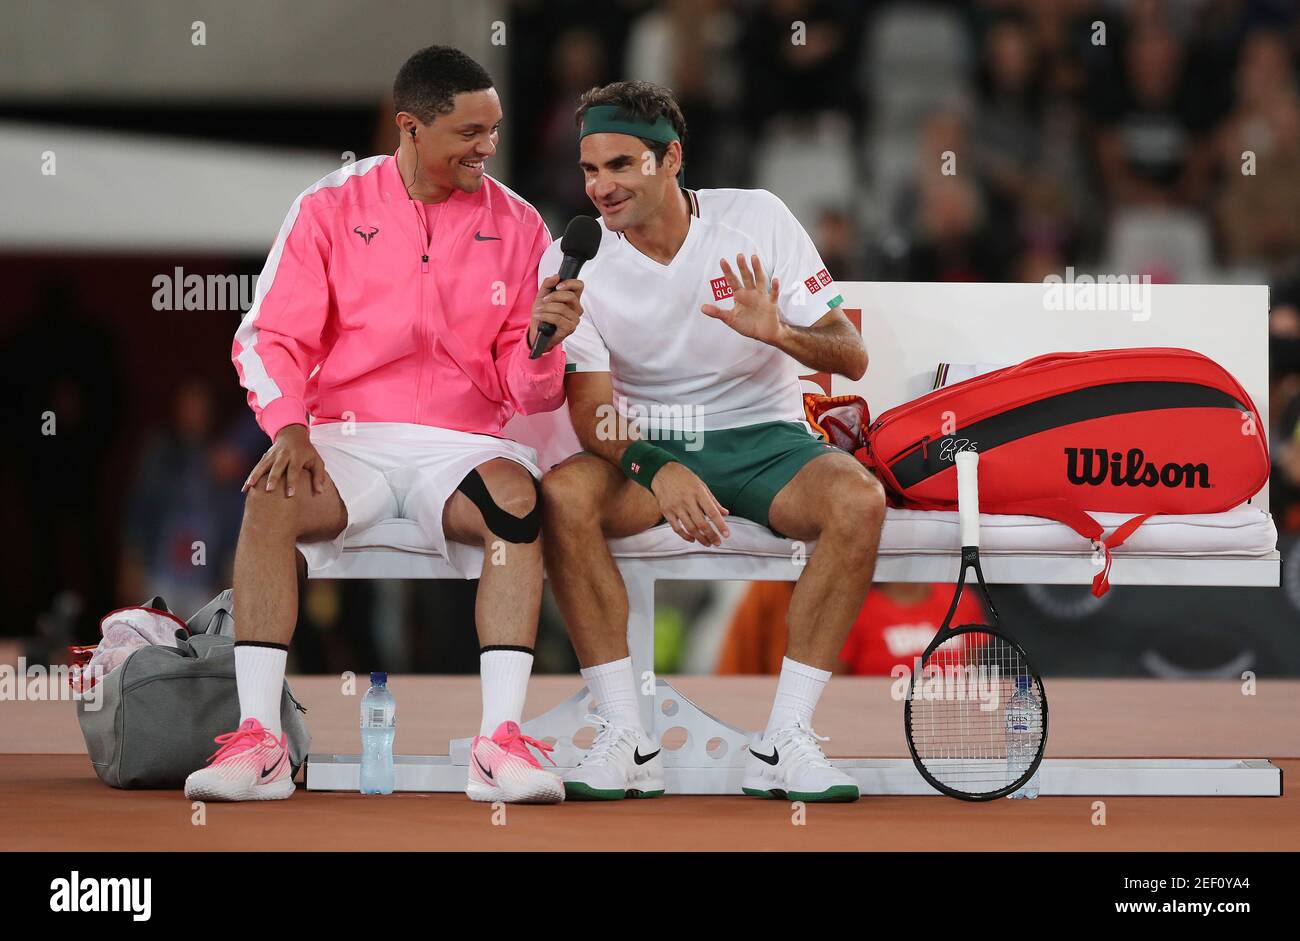 Tennis - "The Match In Africa" Exhibition Match - Cape Town Stadium, Cape  Town, South Africa - February 7, 2020 Switzerland's Roger Federer talks to  Trevor Noah during the exhibition match against